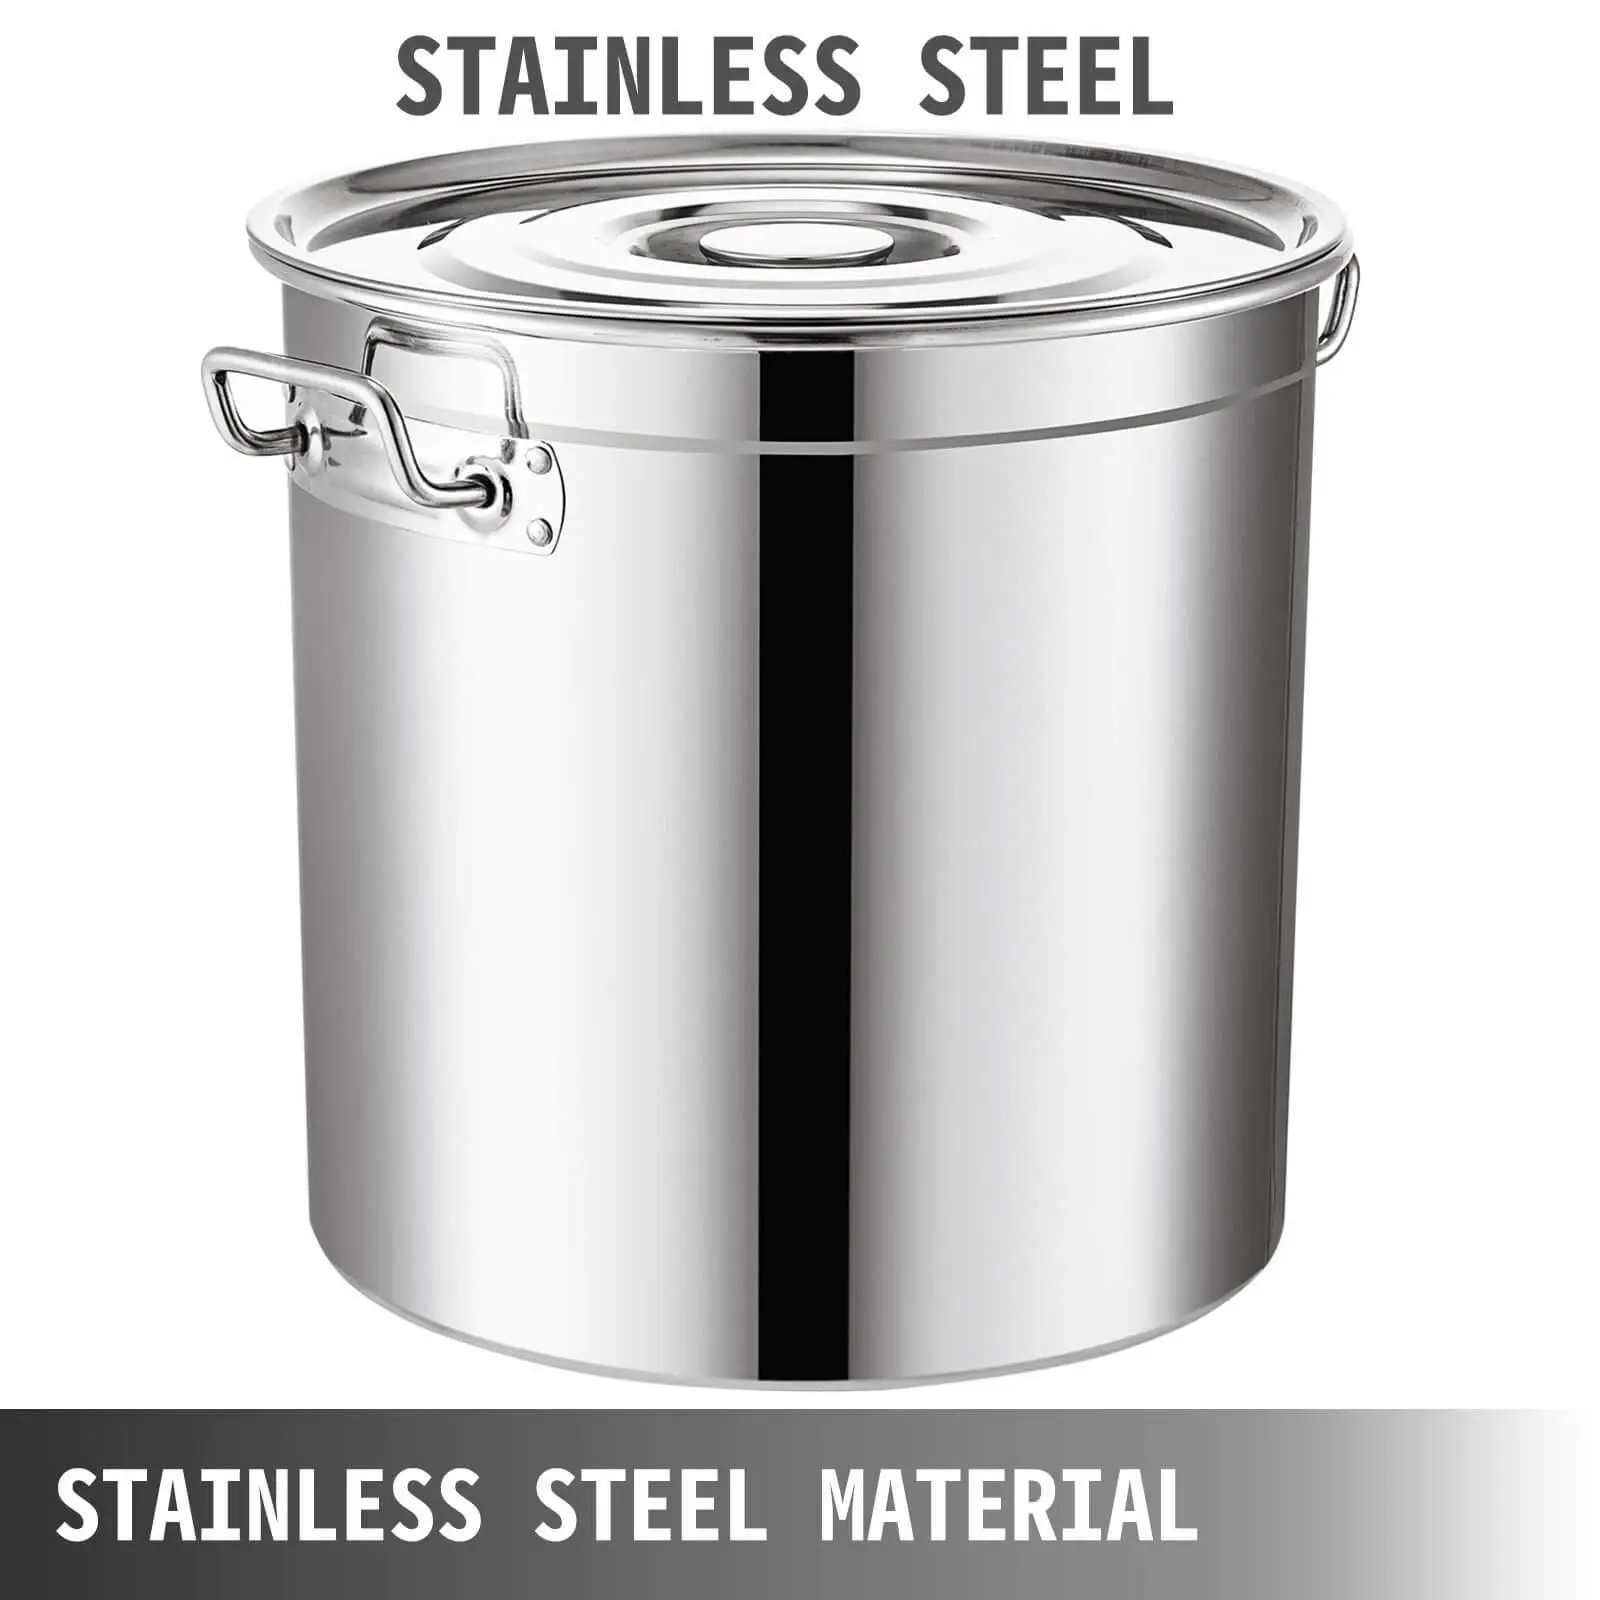 Stockpot with Stainless steel construction